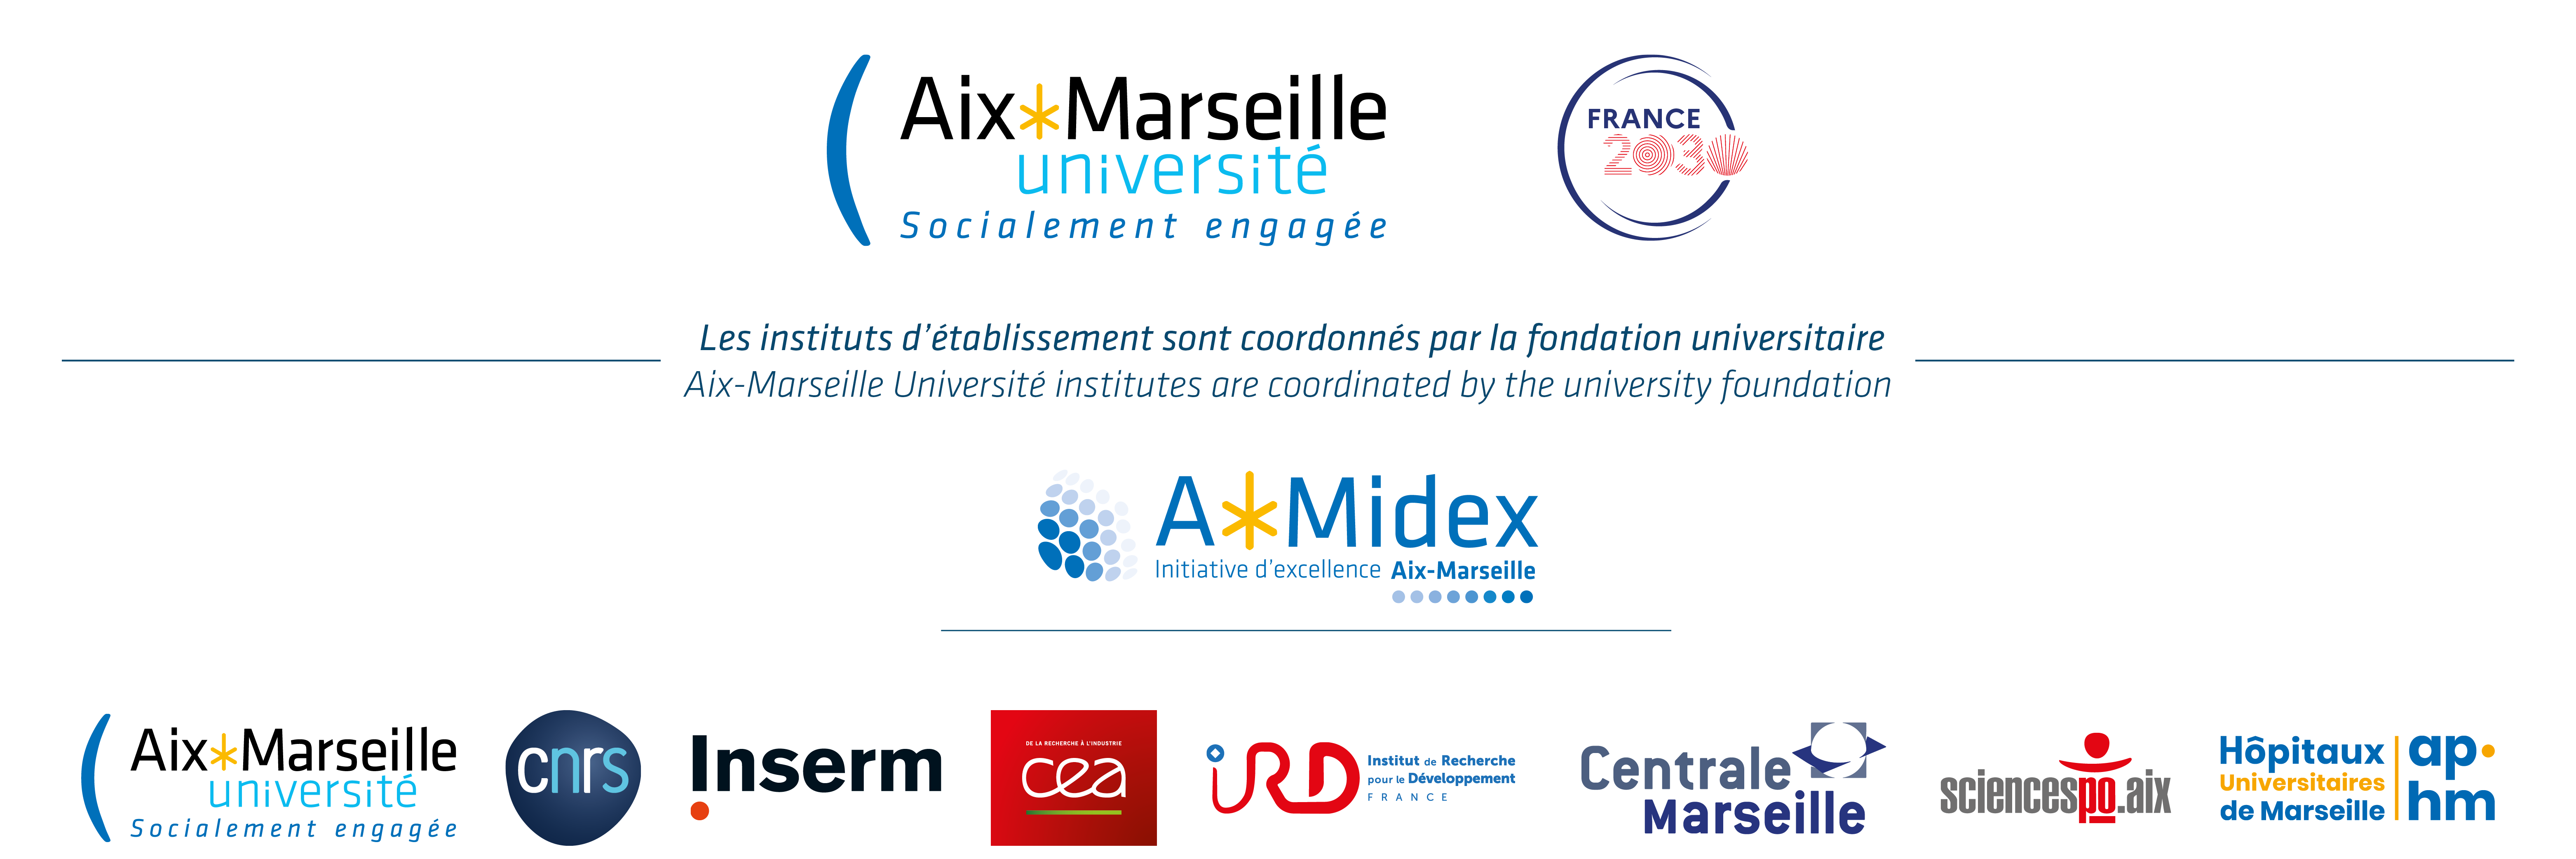 Headband Aix-Marseille Université Institutes for research and education